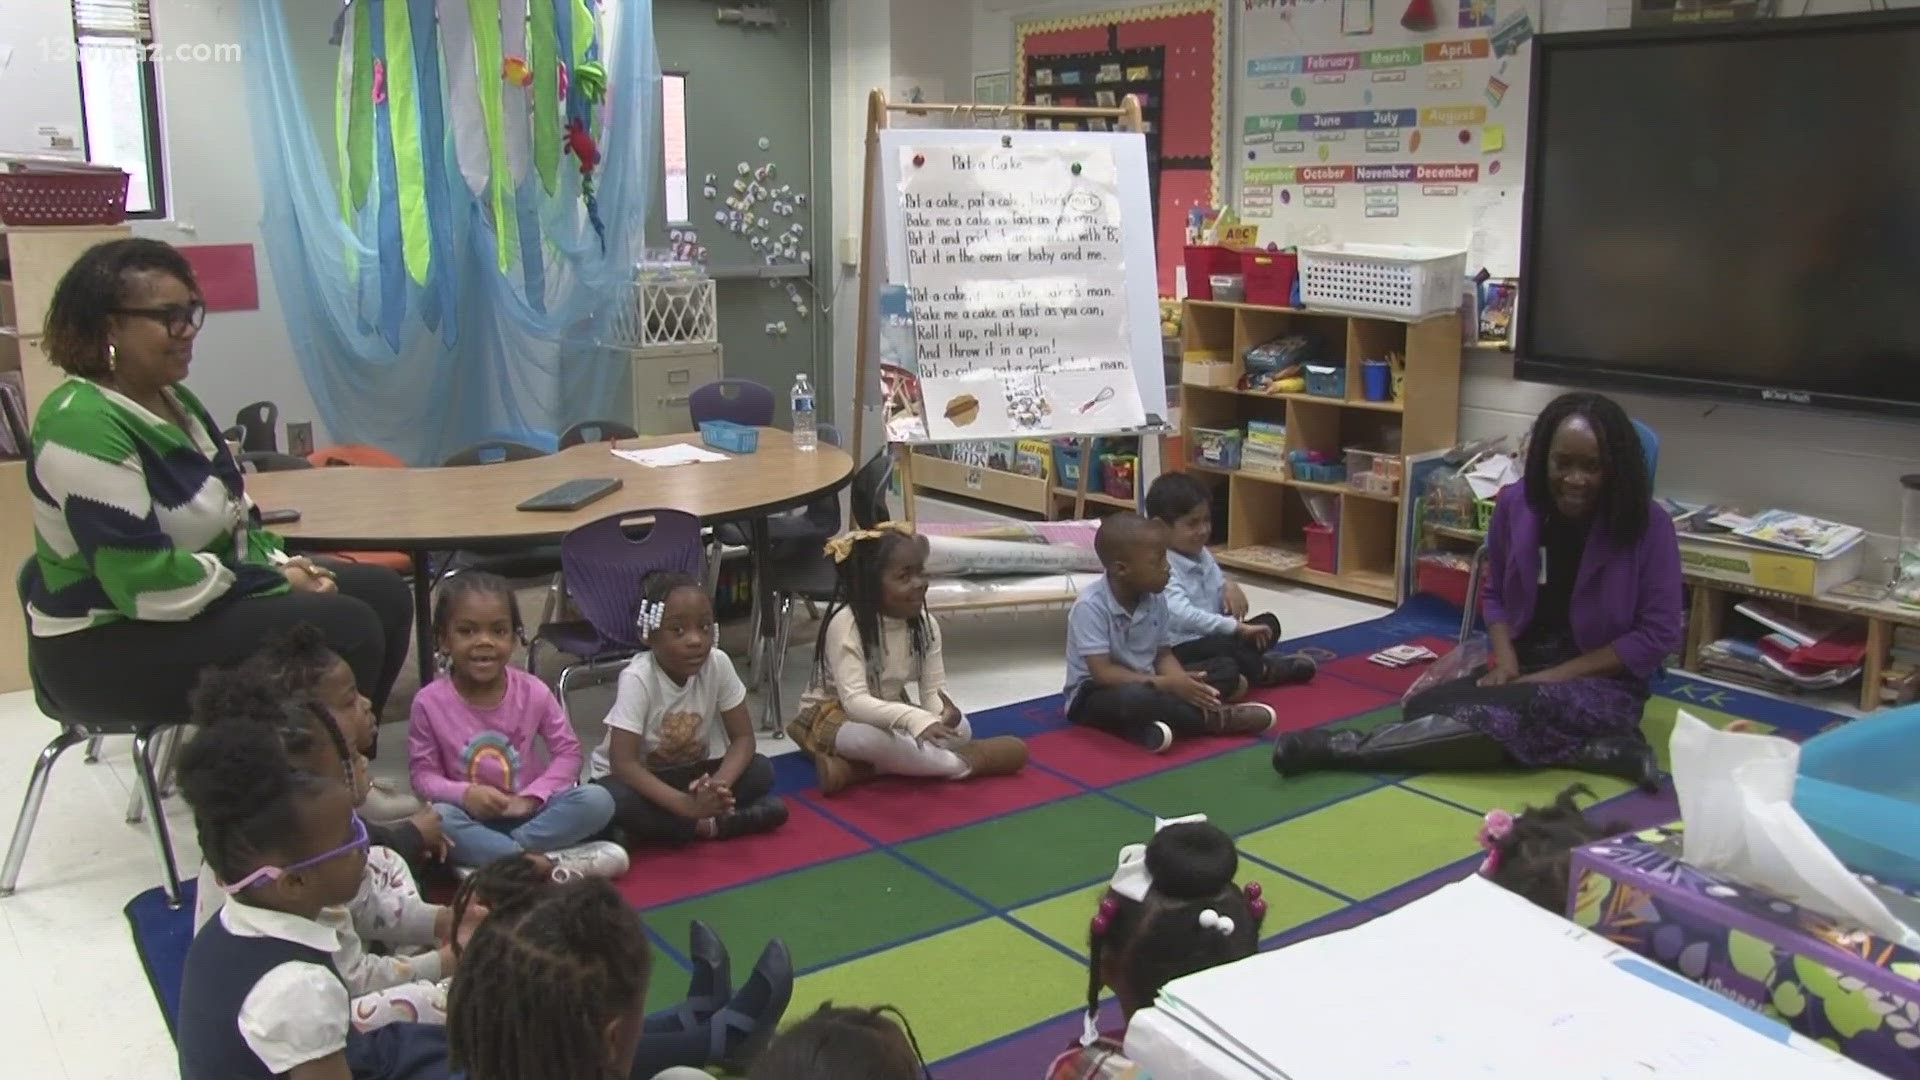 Georgia's Pre-K program helps prepare 4-year-olds for kindergarten and now is the time to apply if you want your child to get a Pre-K slot.